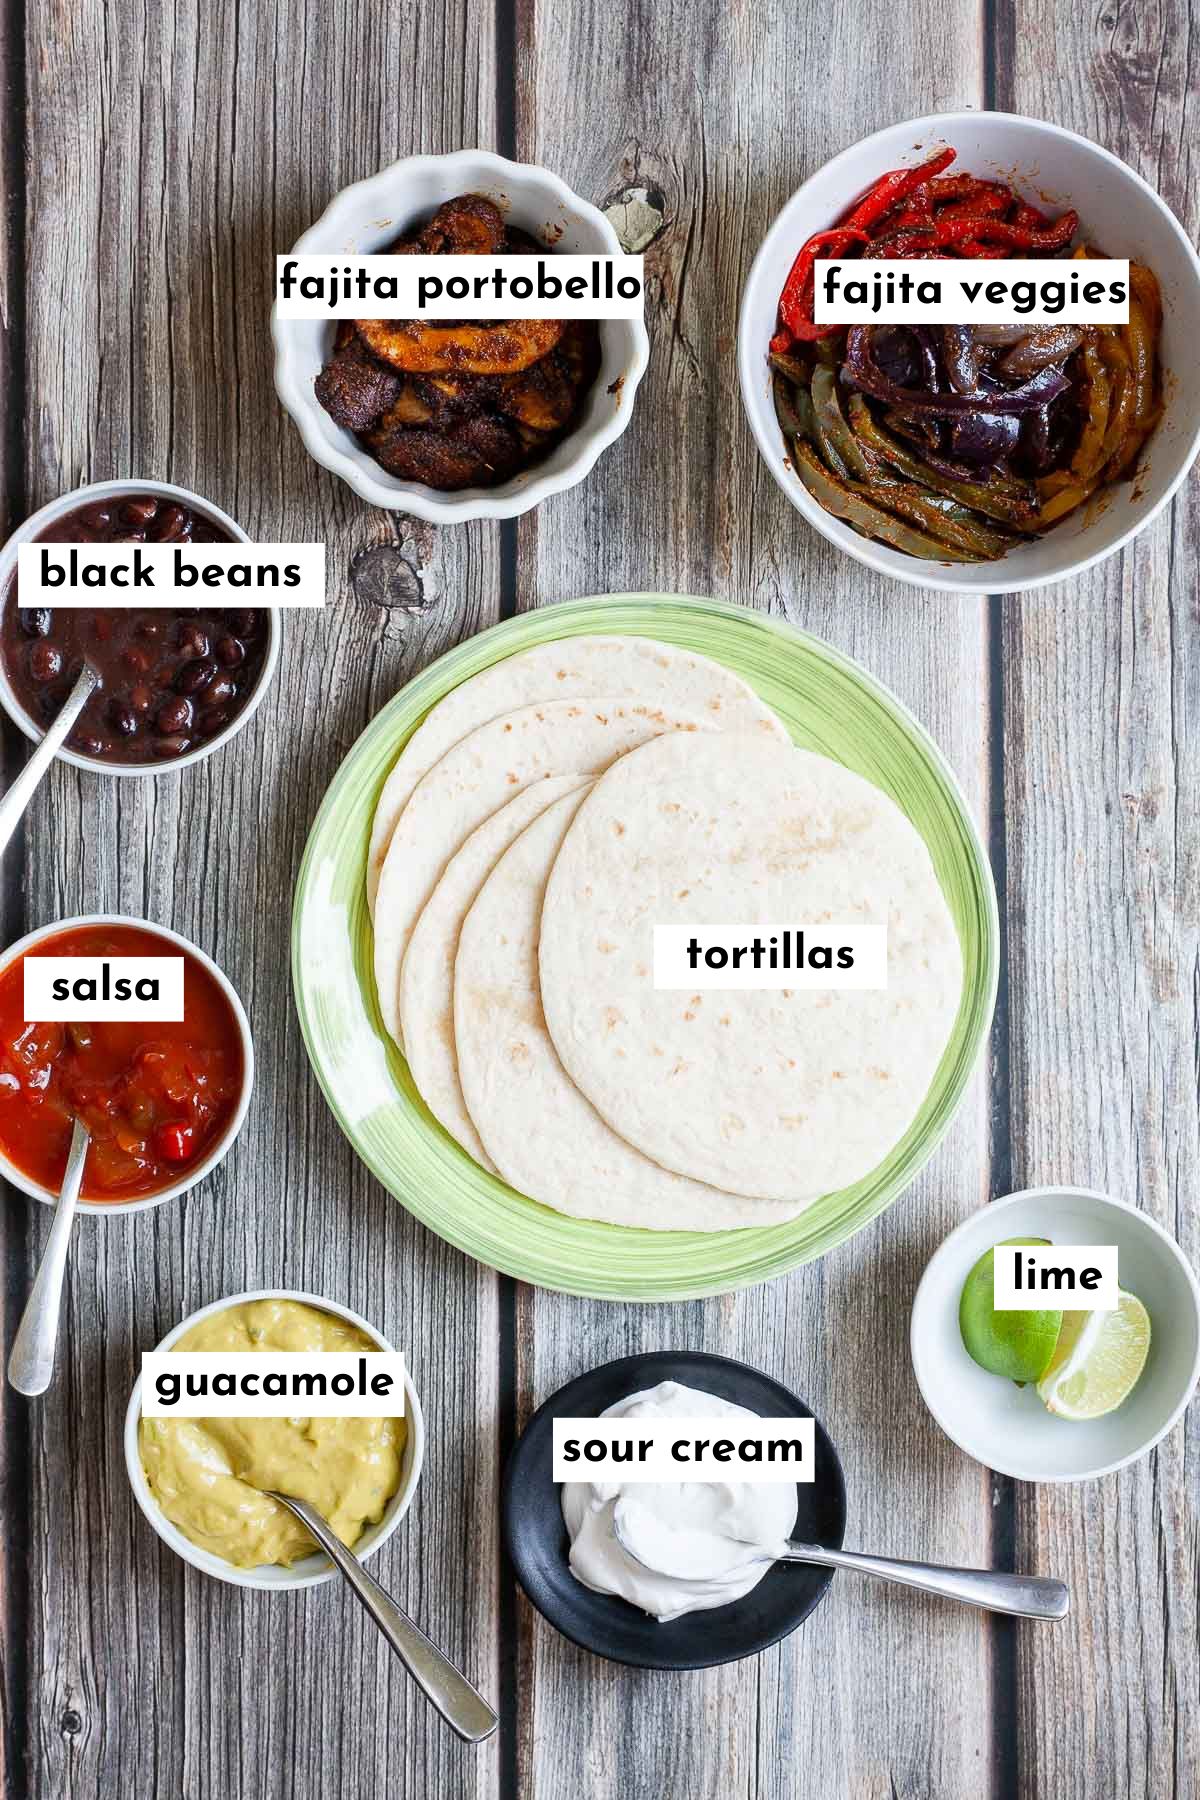 Ingredients to build a mushroom fajitas is in small bowls like guacamole, mushroom slices, veggie slices, black beans, salsa, sour cream, lime and soft tortillas on a green plate